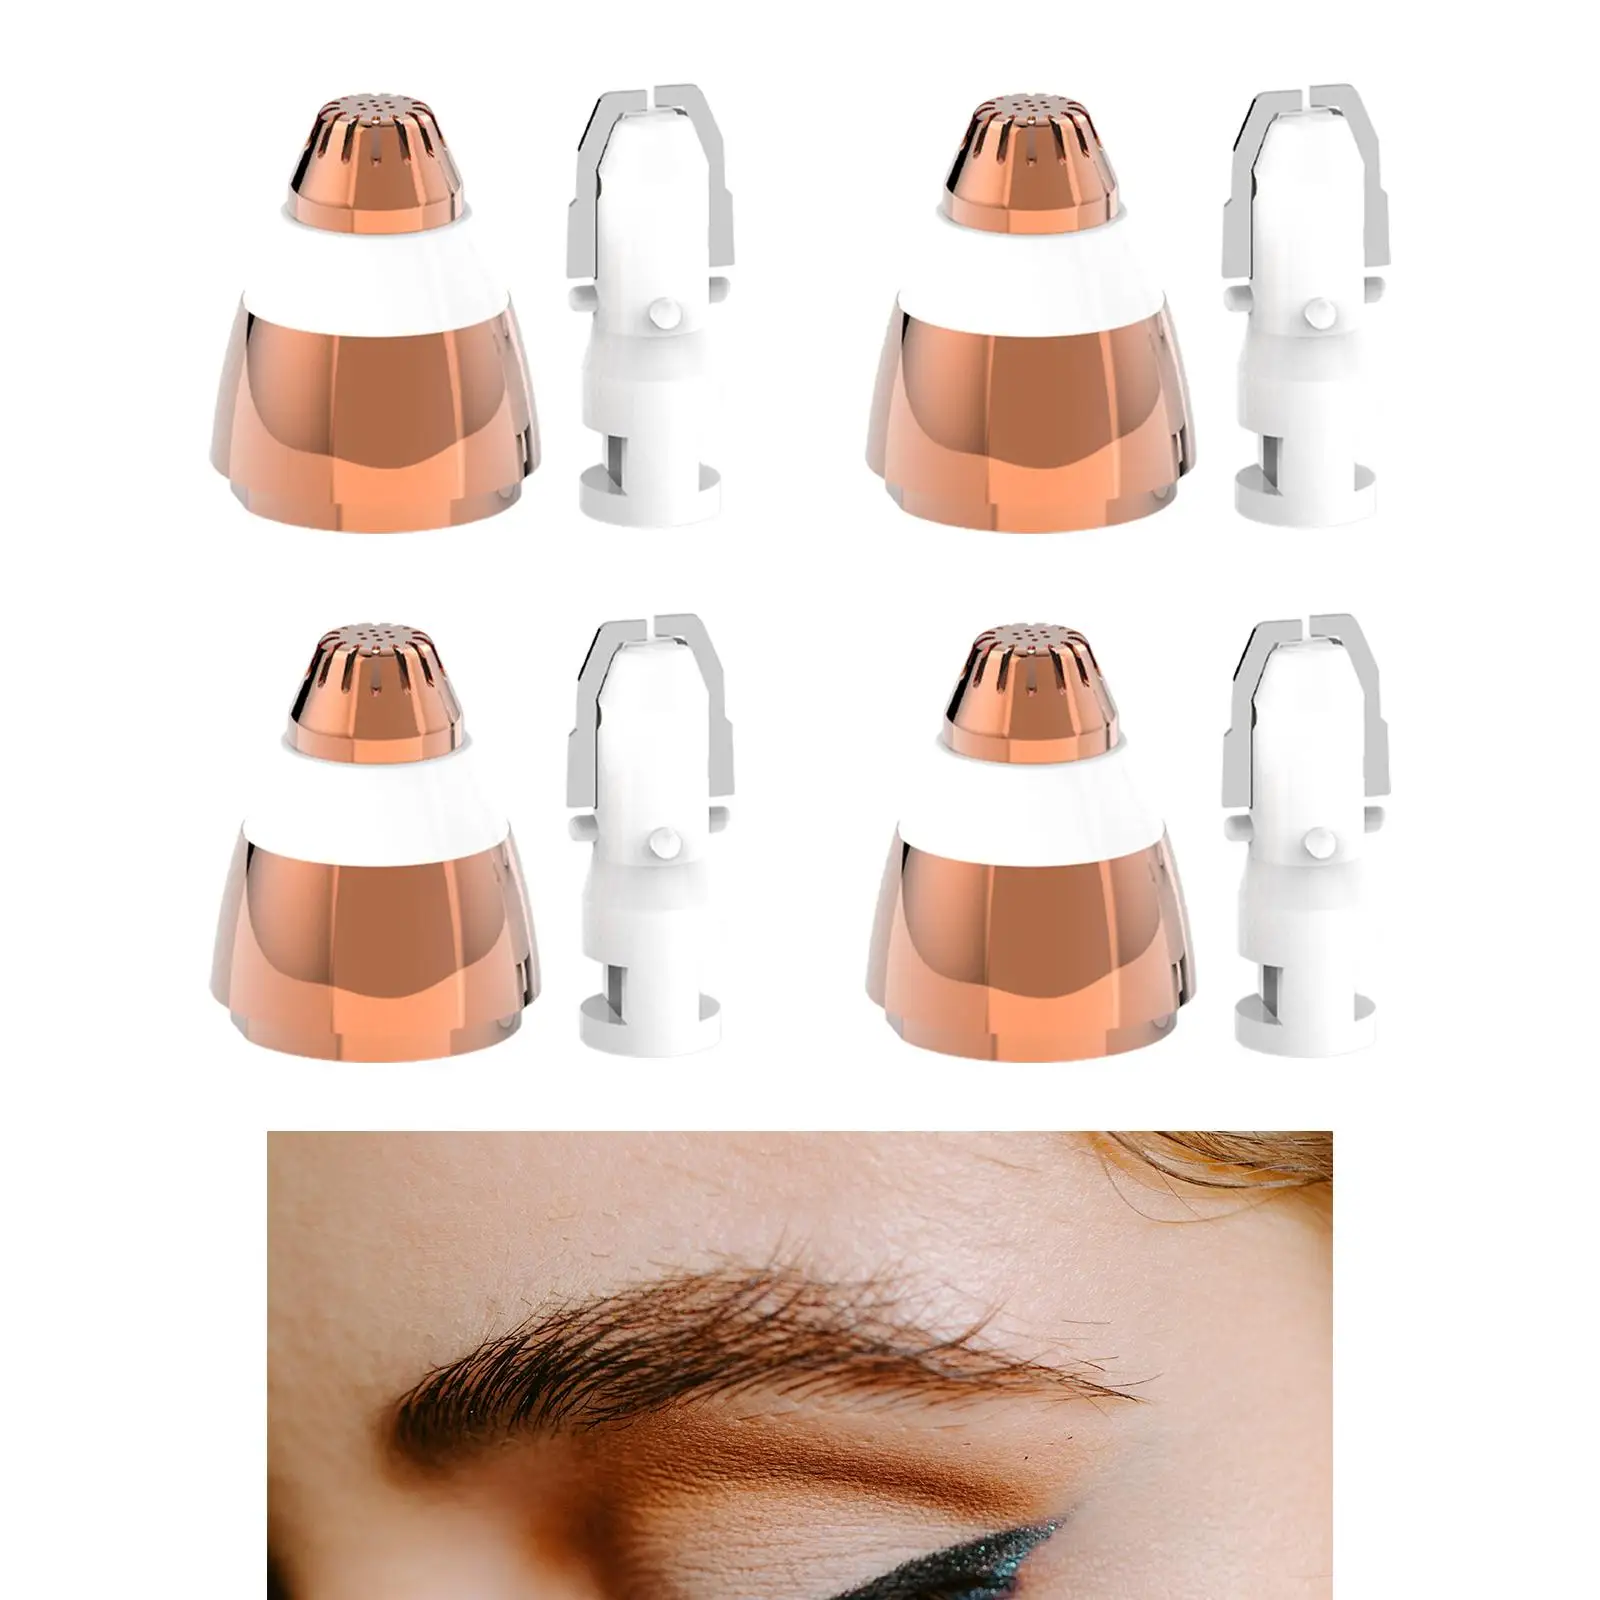 4 Sets Eyebrow Trimmer Razor Replacement Heads Shaving Facial Hair Remover Women Eyebrow Facial Hair Removal Tool Parts